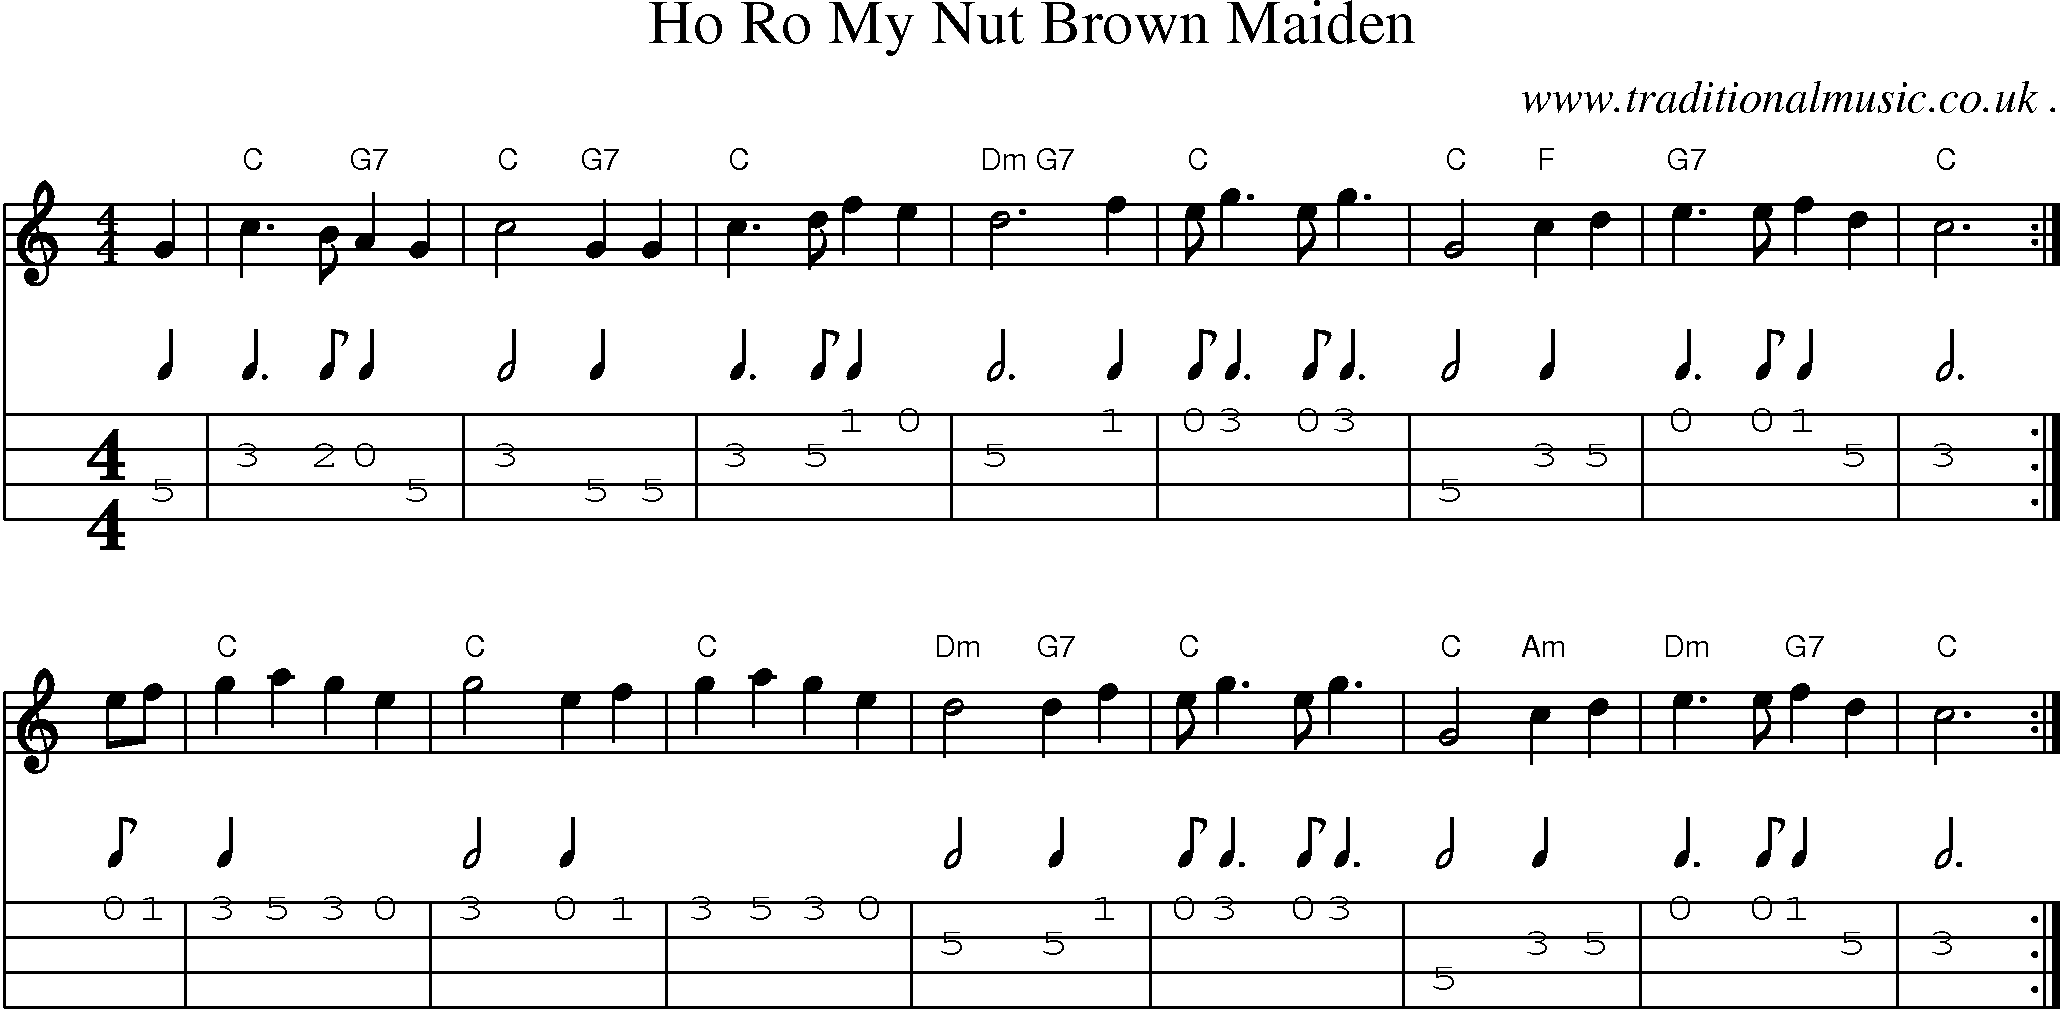 Sheet-Music and Mandolin Tabs for Ho Ro My Nut Brown Maiden